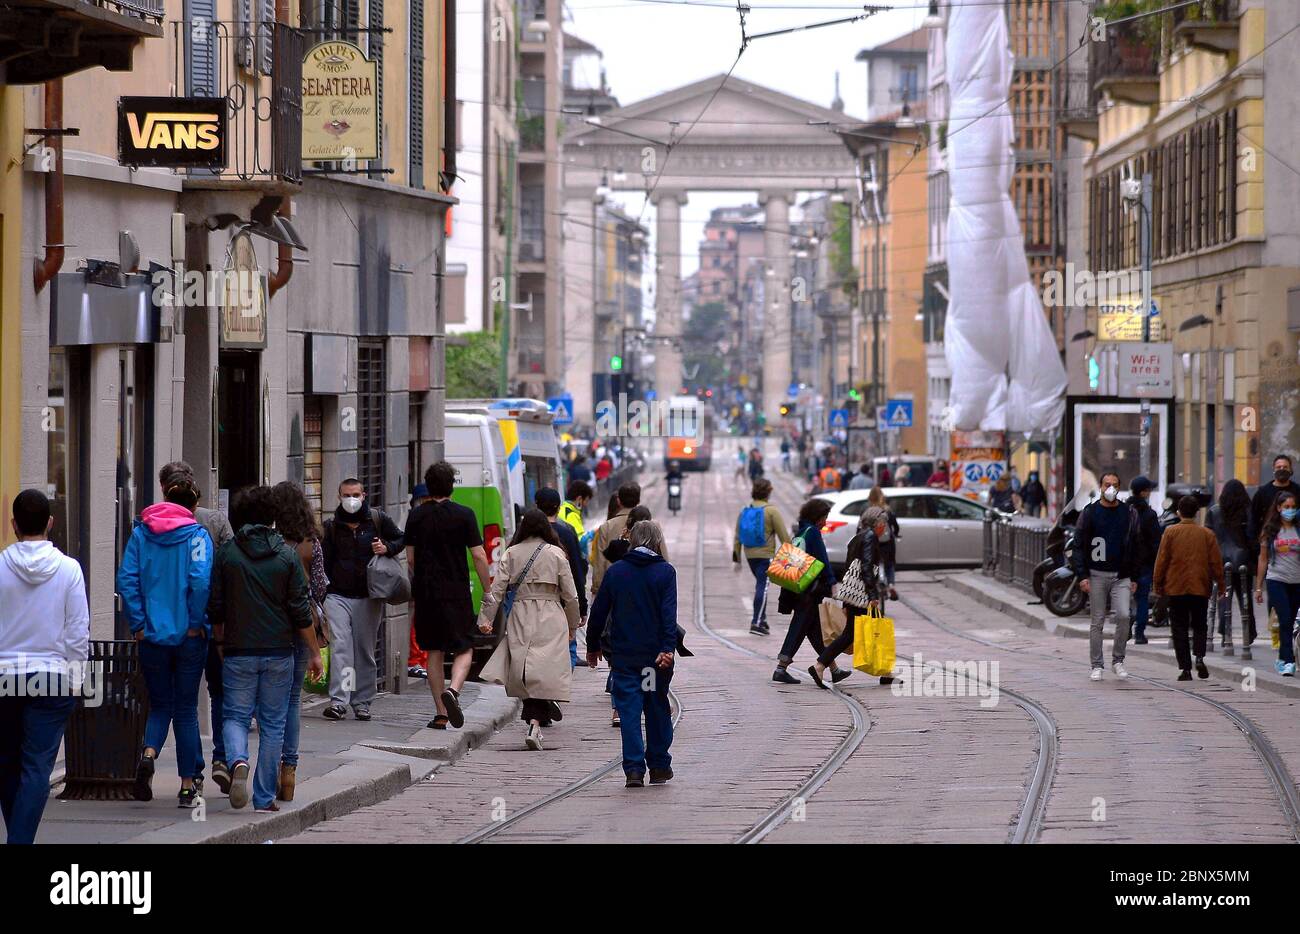 Milan, Phase 2, Towards normalcy, coronavirus emergency, the city comes to  life again, crowds of people on the streets, Corso di Porta Ticinese with  people (Maurizio Maule/Fotogramma, Milan - 2020-05-16) p.s. la